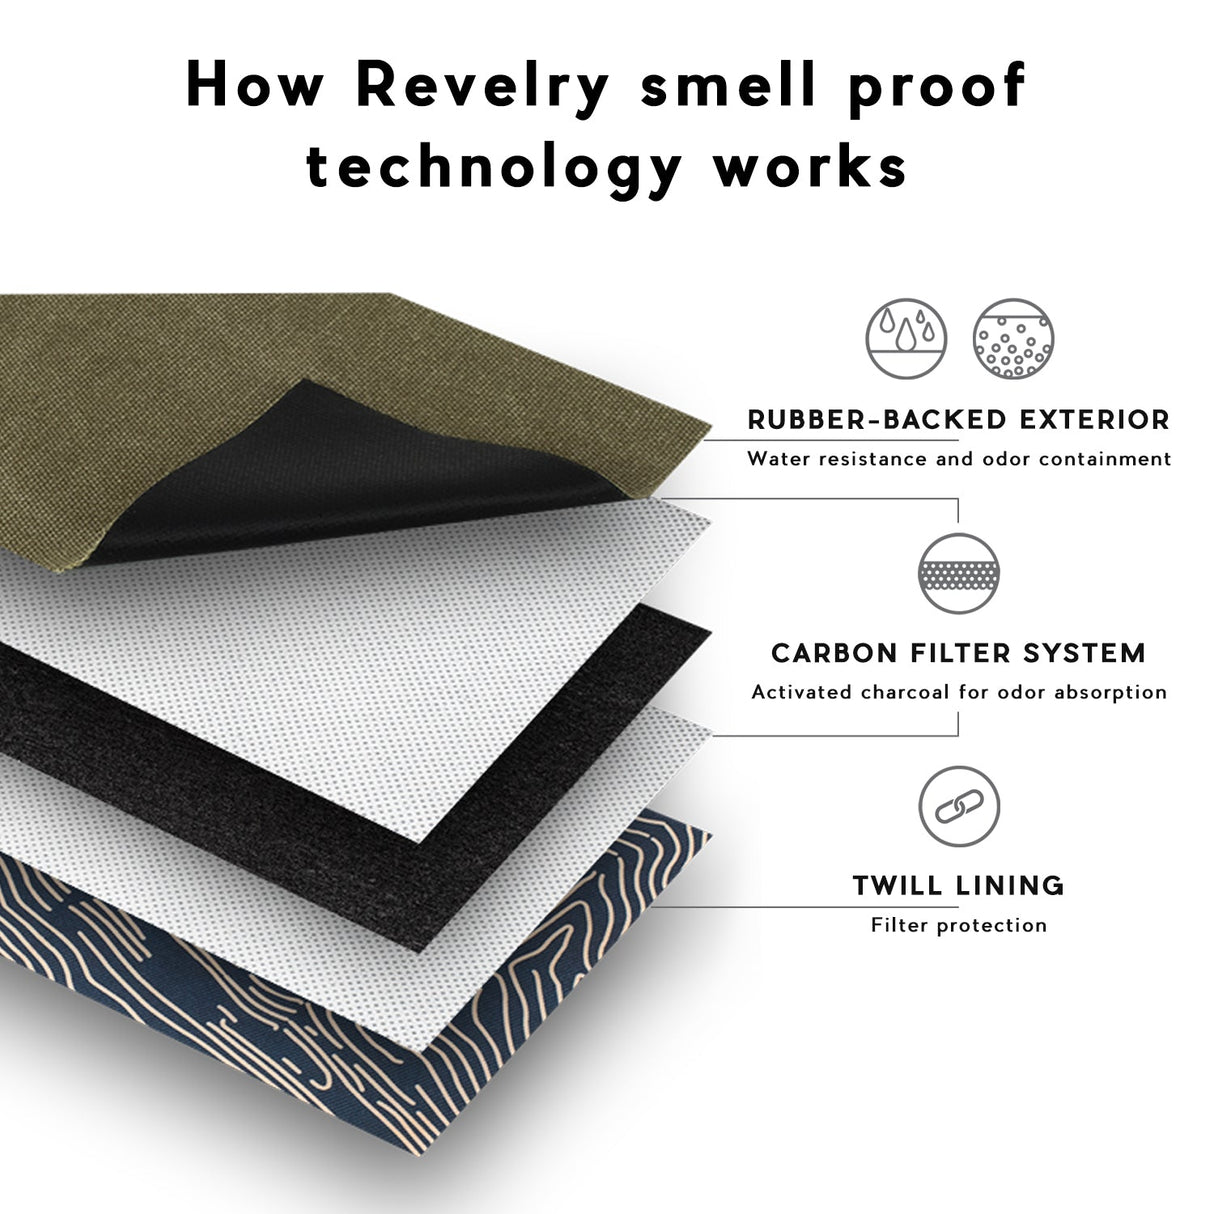 Revelry Supply Pipe Kit - Smell Proof Technology Layers Explained